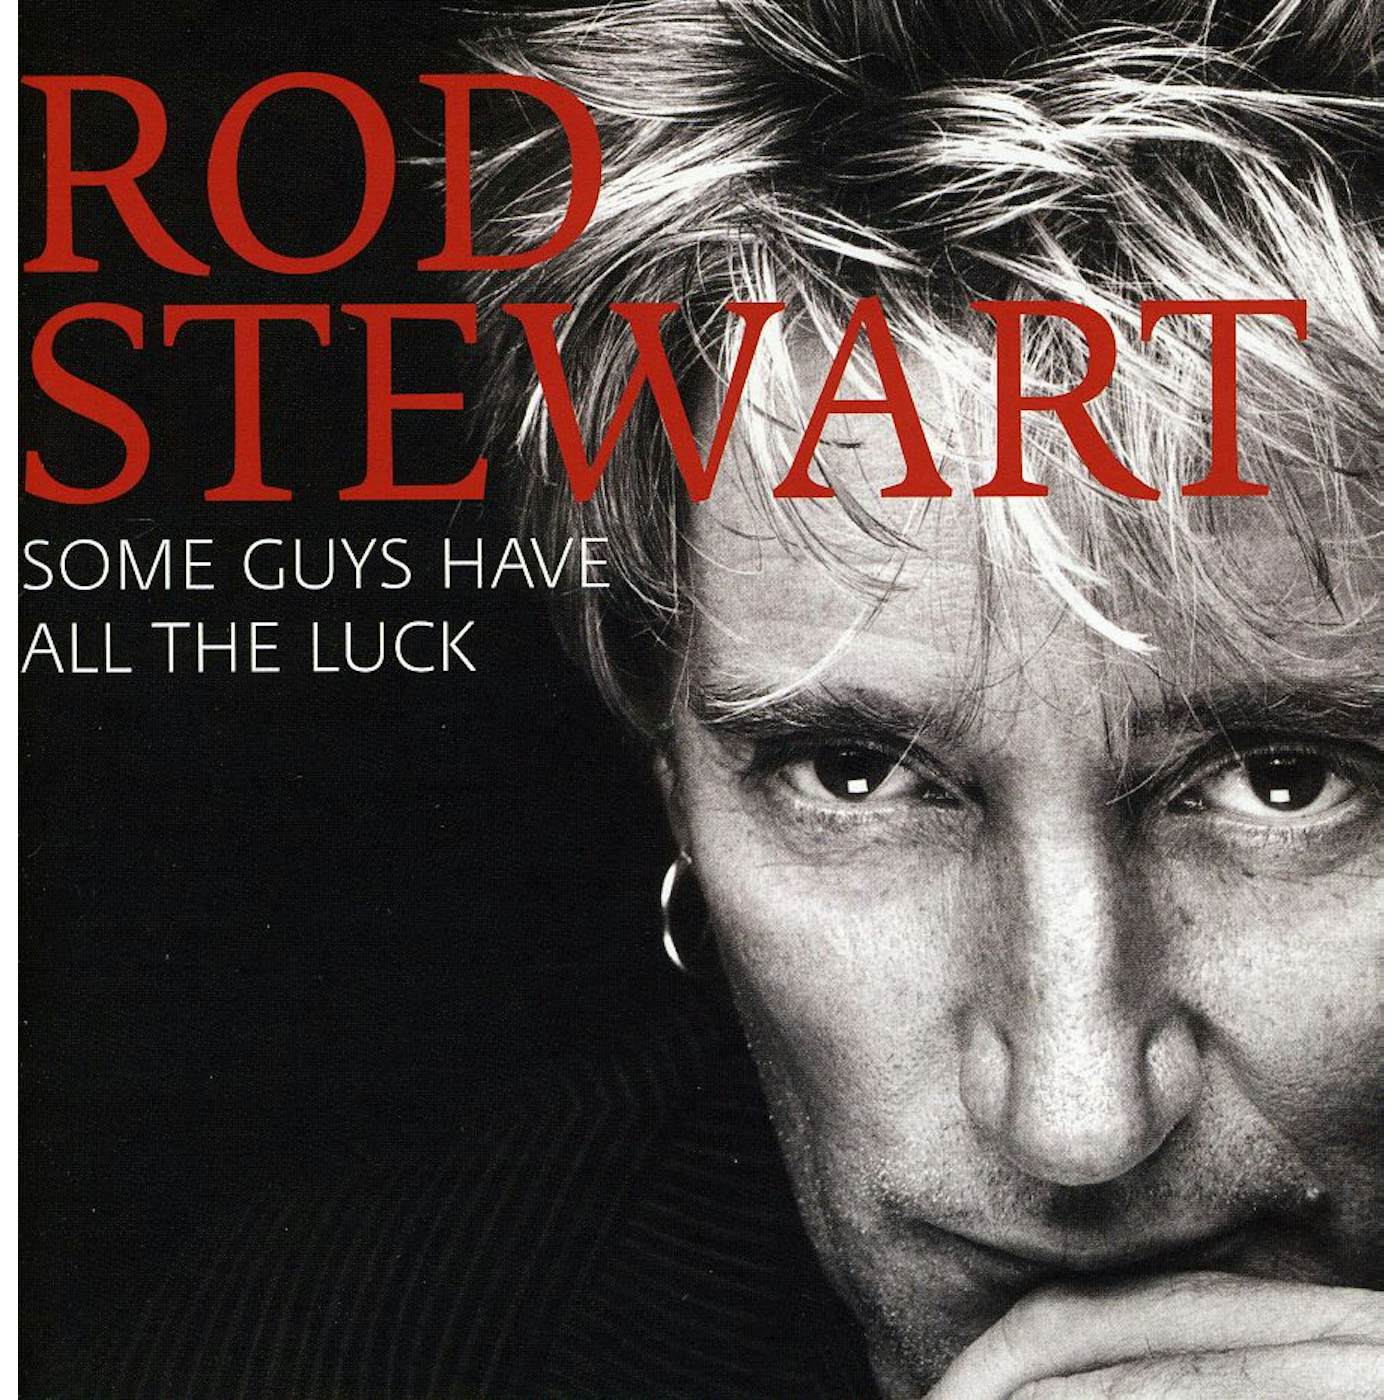 Rod Stewart SOME GUYS HAVE ALL THE LUCK: BEST OF CD